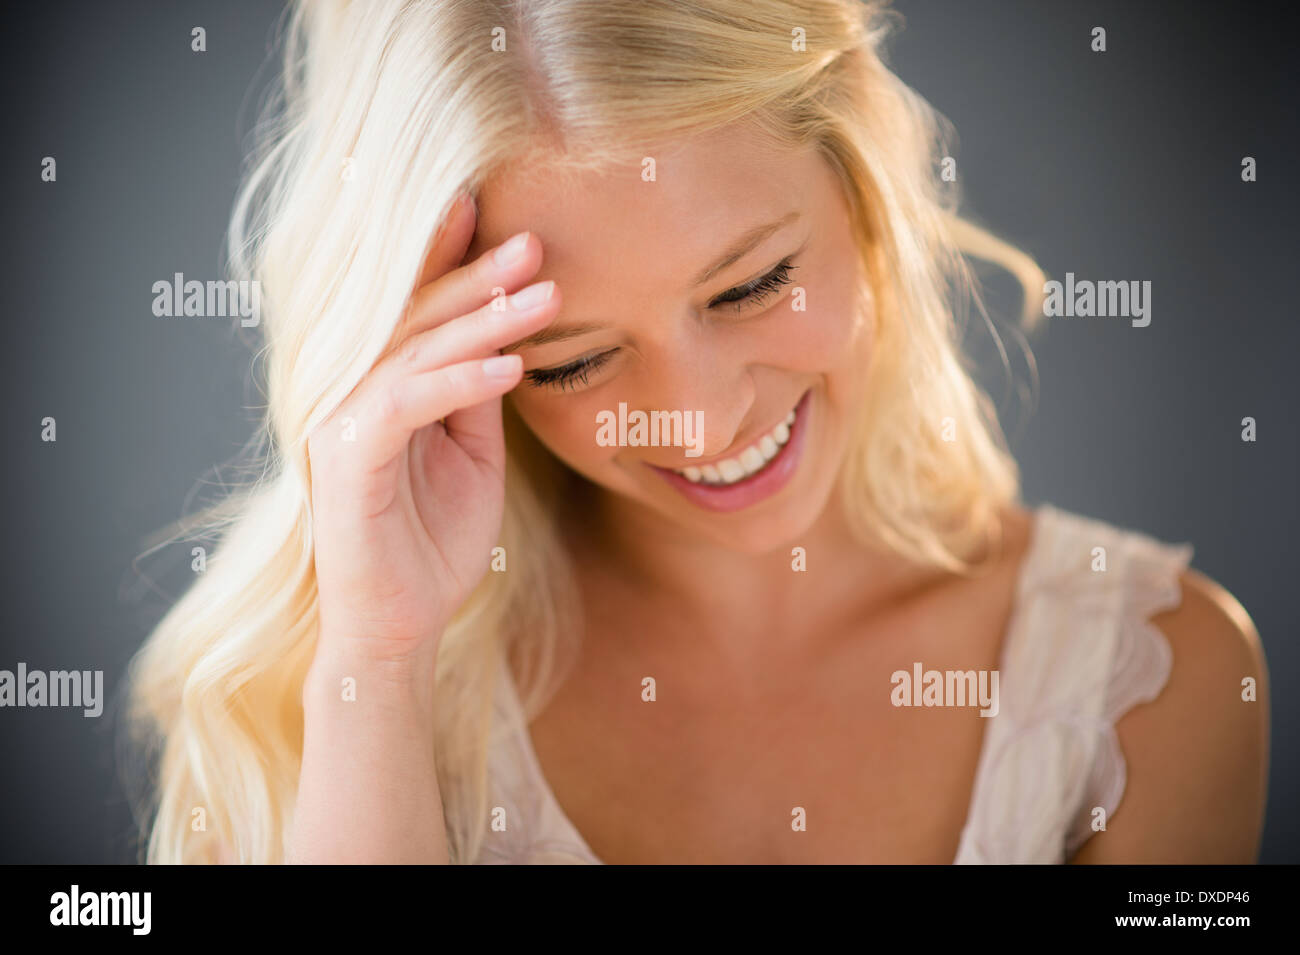 Portrait of young woman braiding hair Stock Photo